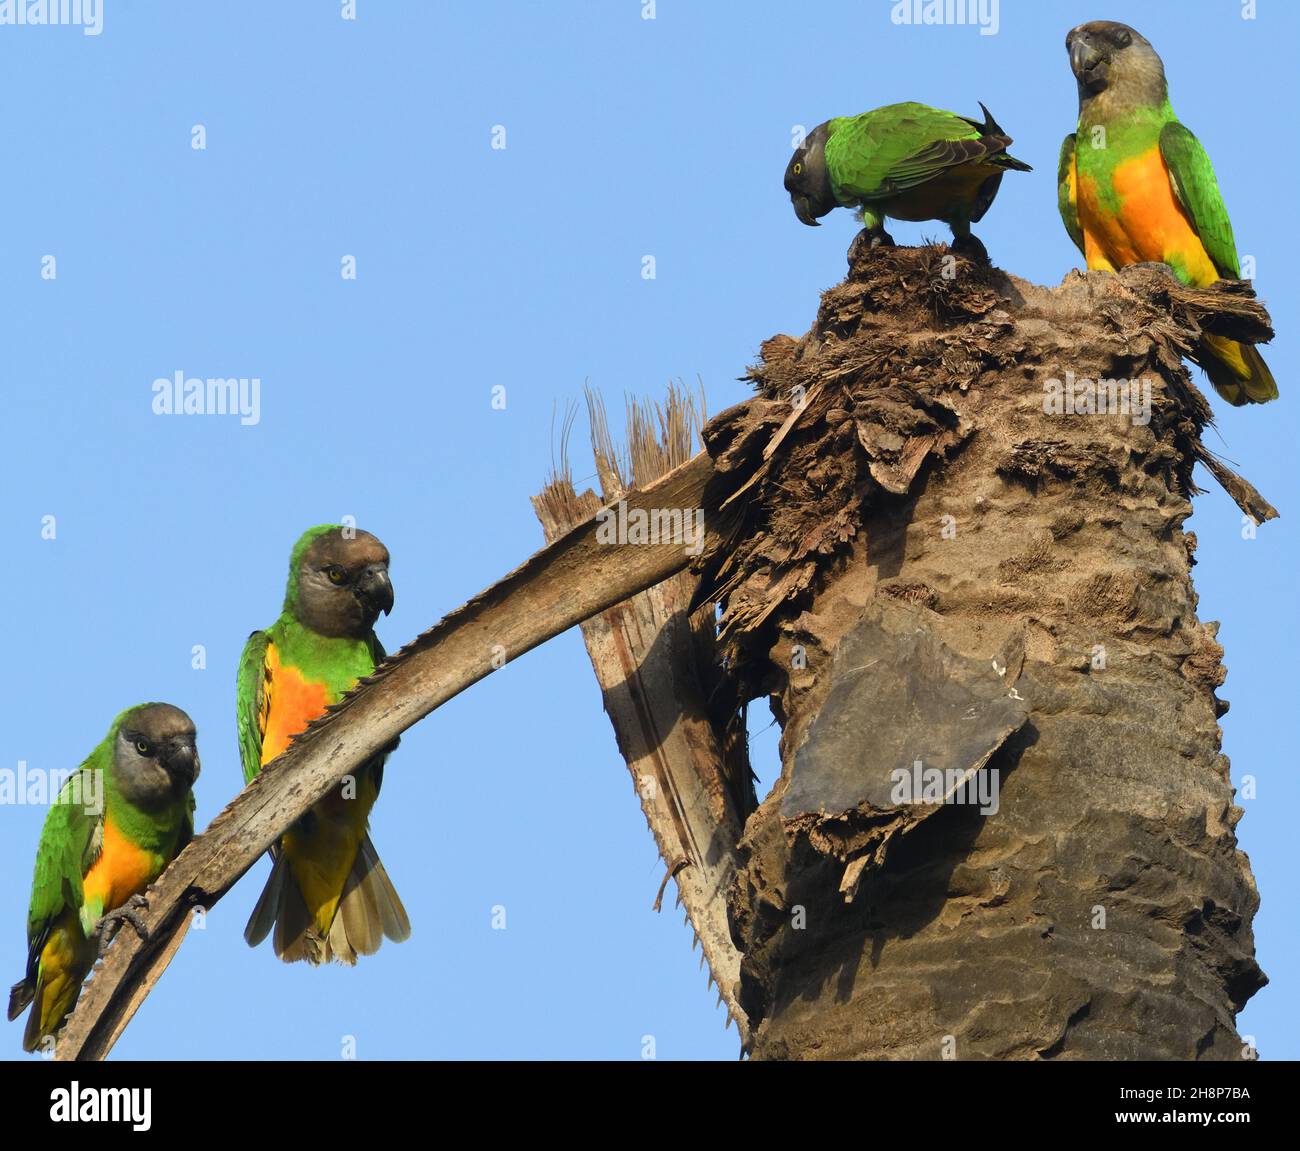 A group of Senegal parrot (Poicephalus senegalus) communicate noisily on a dead palm tree. Kotu, The Republic of the Gambia. Stock Photo